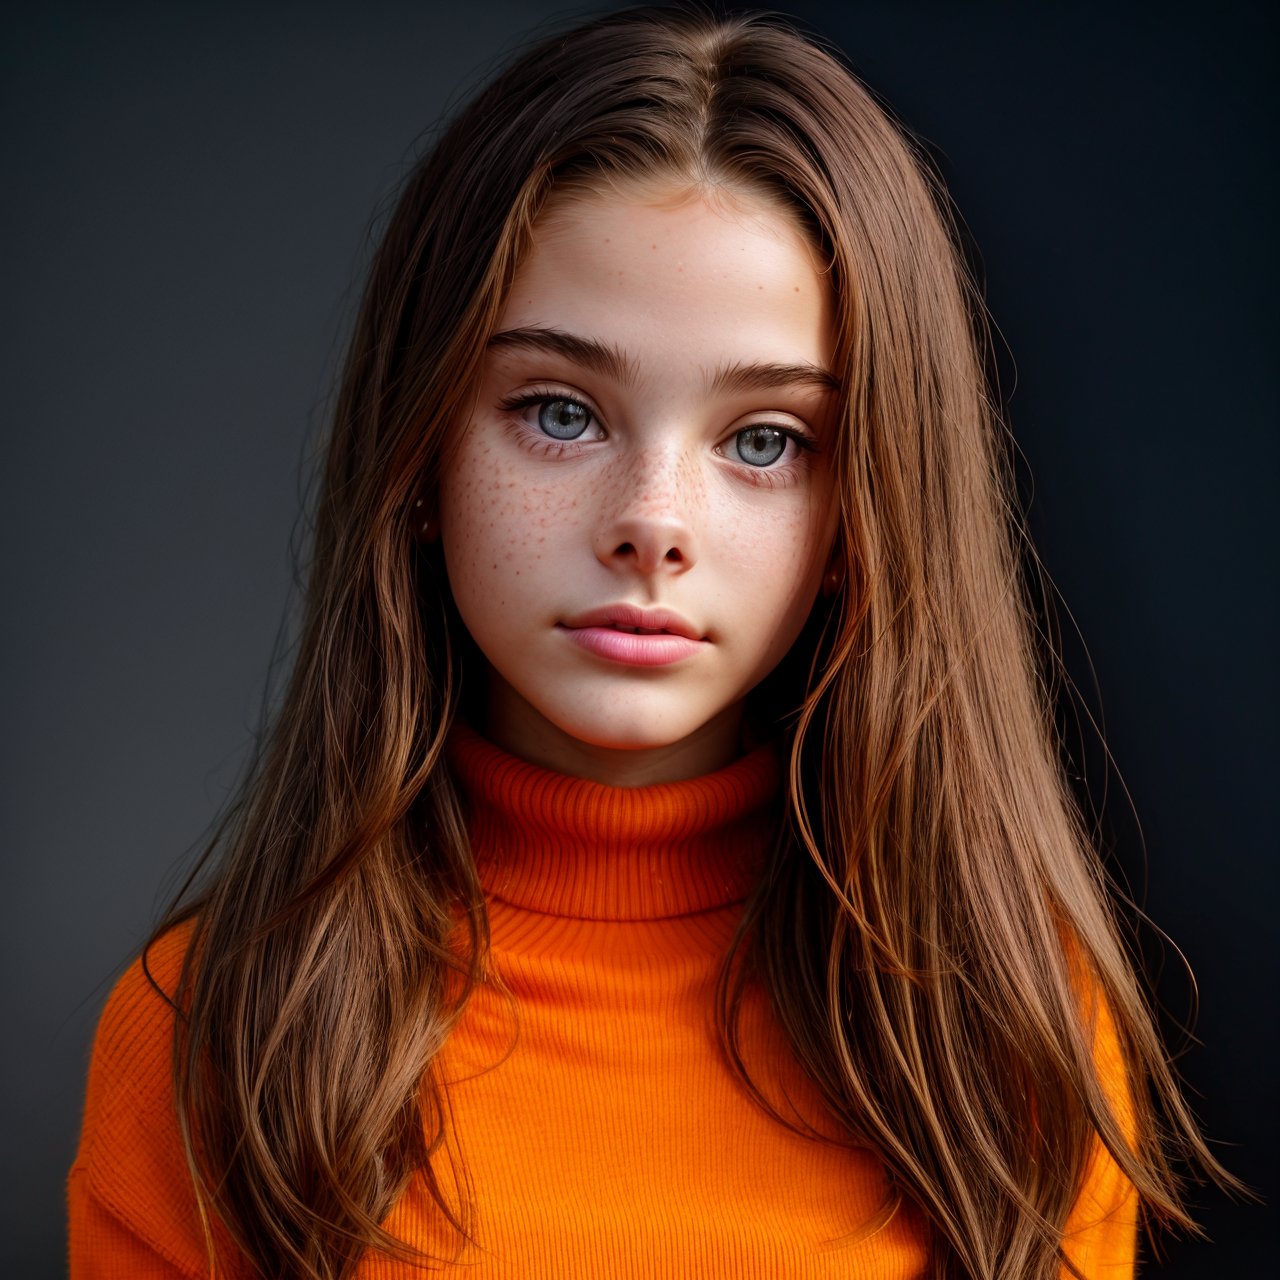 best quality, extra resolution, close up portrait of adorable (AIDA_LoRA_MeW2016:1.1) <lora:AIDA_LoRA_MeW2016:0.9> in (gray and orange turtle neck sweater:1.1), [little girl], glossy skin with visible pores and freckles, pretty face, naughty, playful, intimate, flirting, cinematic, studio photo, kkw-ph1, (colorful:1.1), (charcoal smoky black background:1.1)